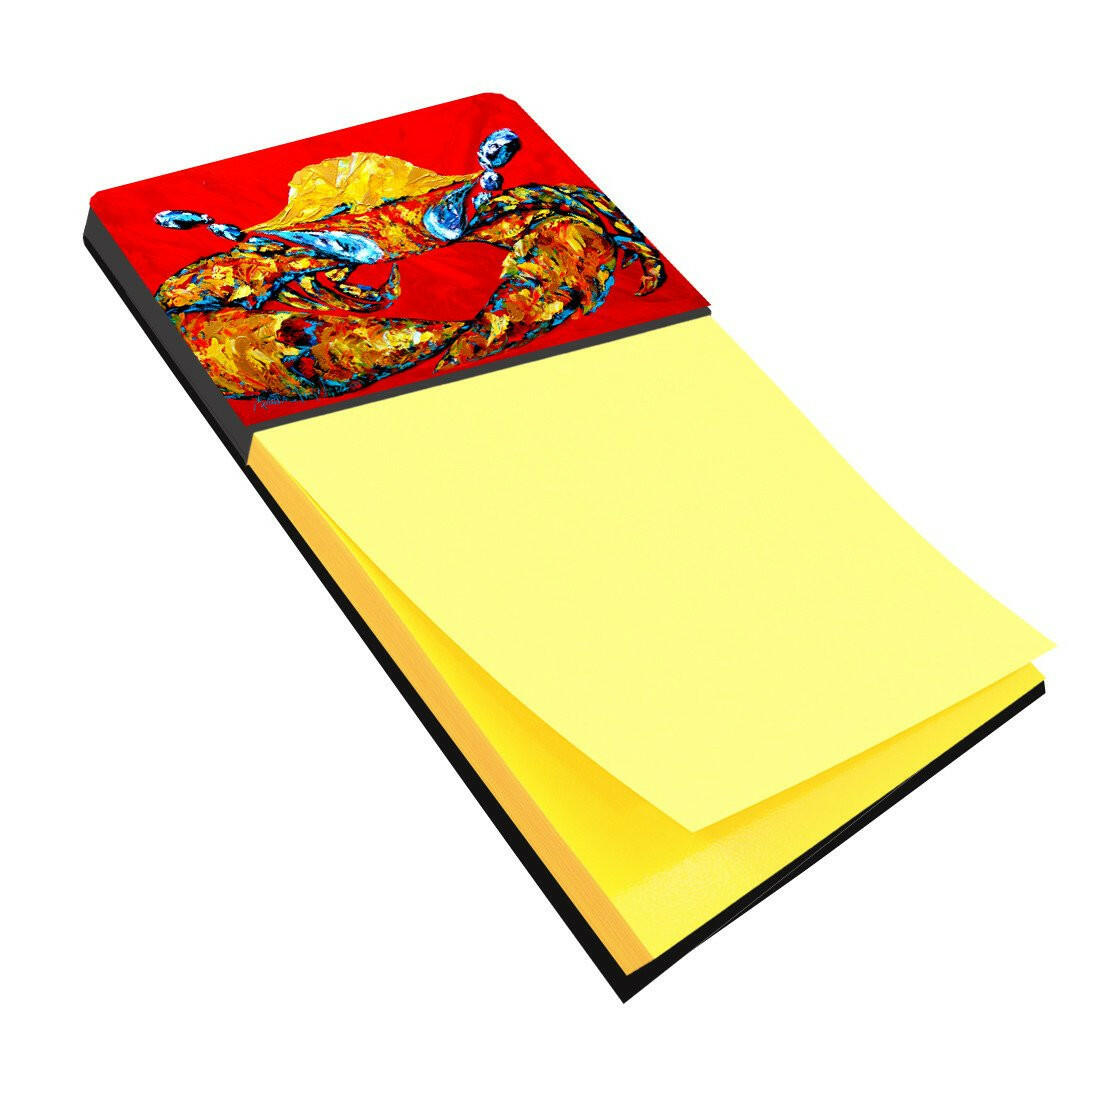 Crab Fat and Sassy Refiillable Sticky Note Holder or Postit Note Dispenser MW1115SN by Caroline's Treasures